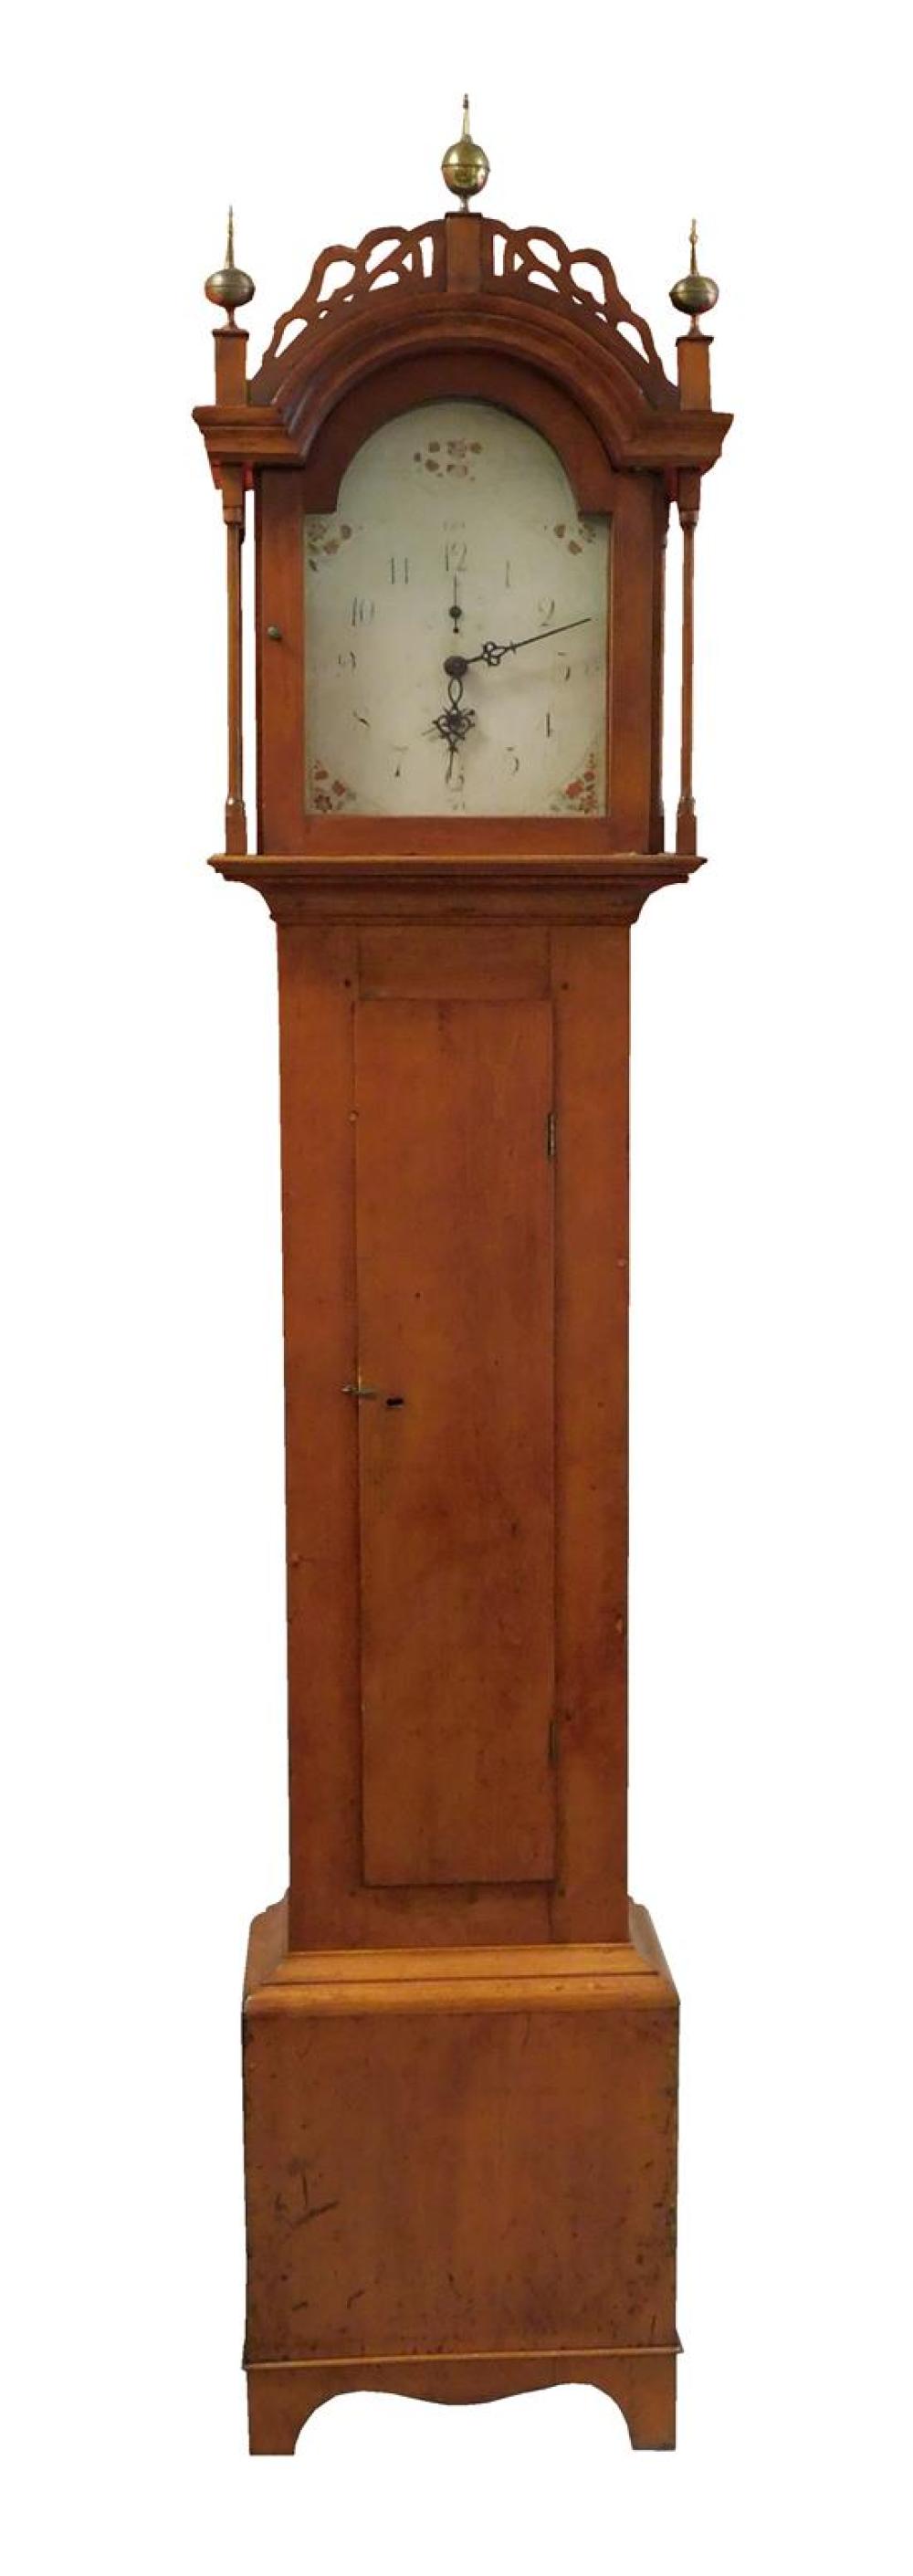 TALL CASE CLOCK NEW ENGLAND EARLY 31bffe